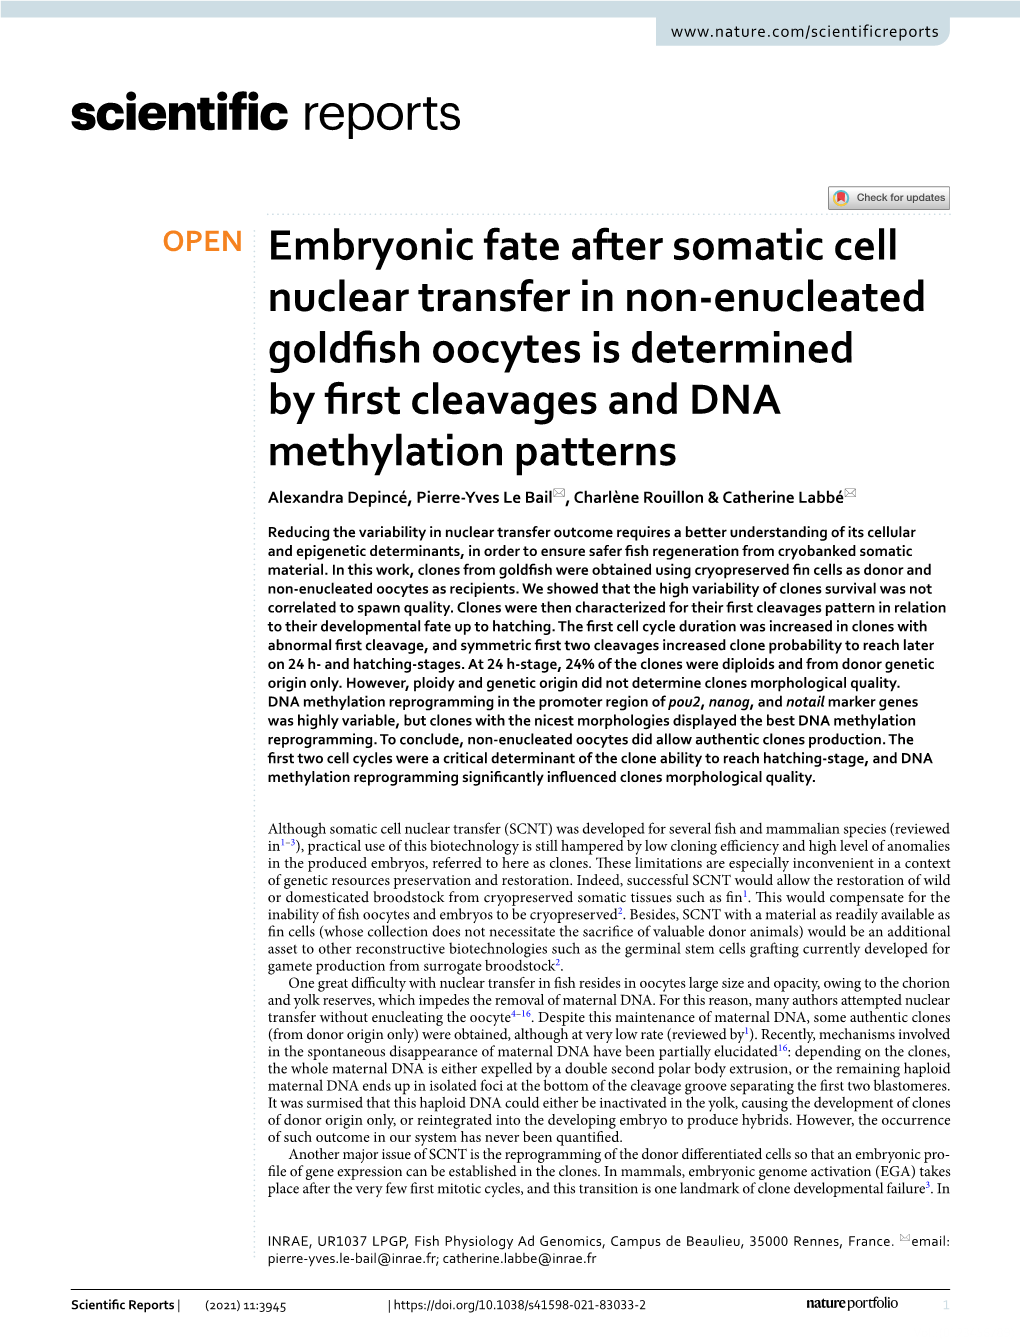 Embryonic Fate After Somatic Cell Nuclear Transfer in Non-Enucleated